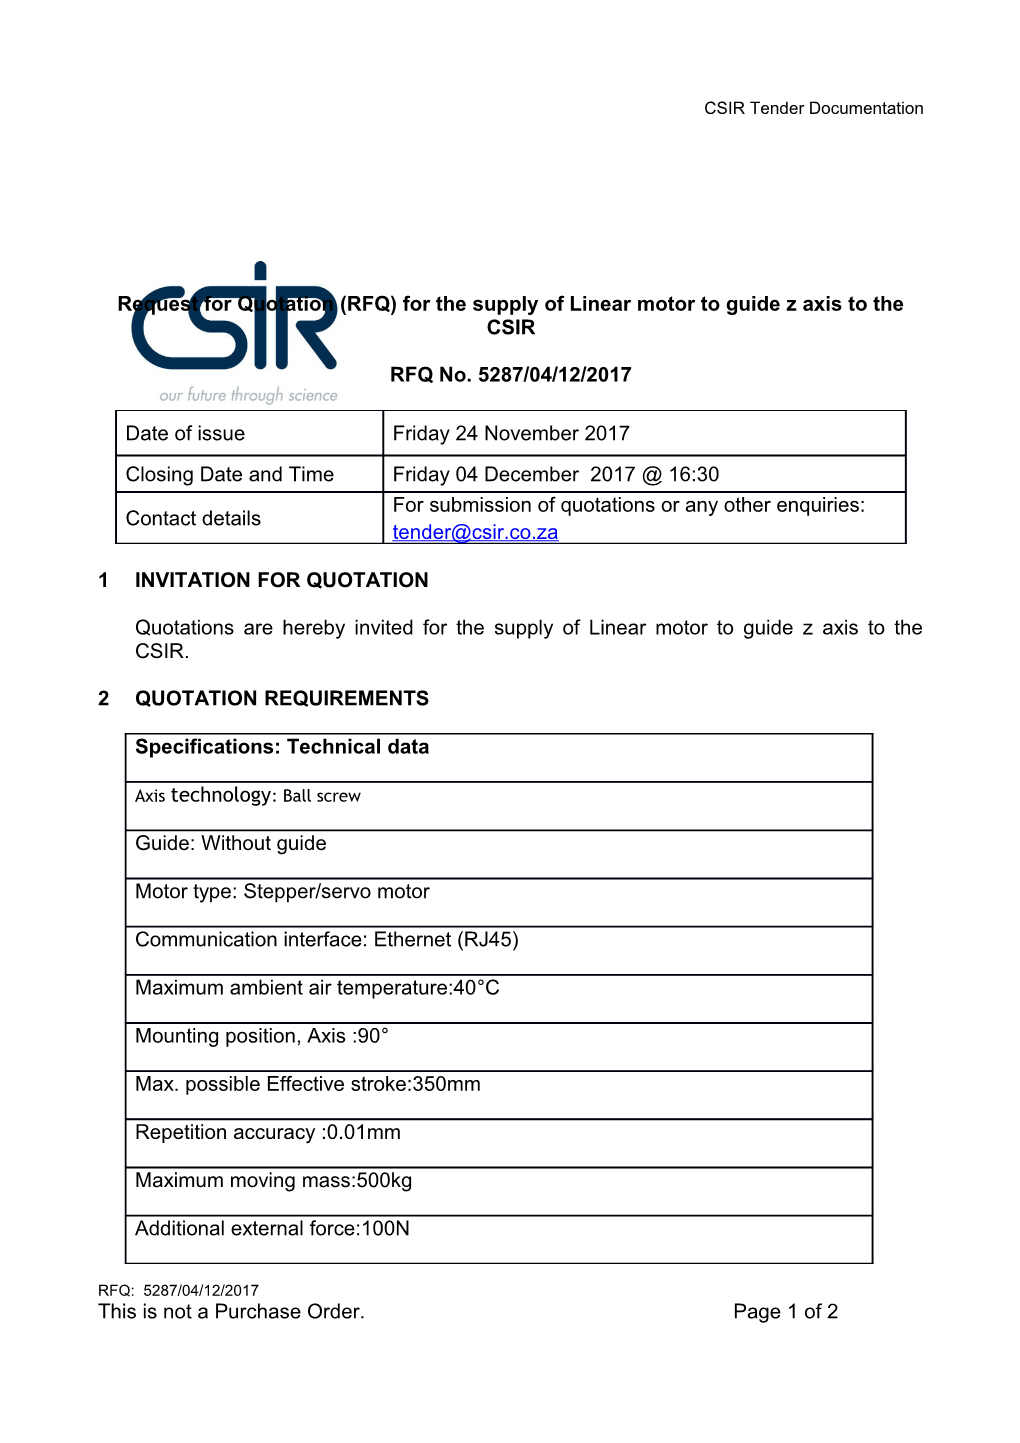 Request for Quotation (RFQ) for the Supply of Linear Motor to Guide Z Axis to the CSIR